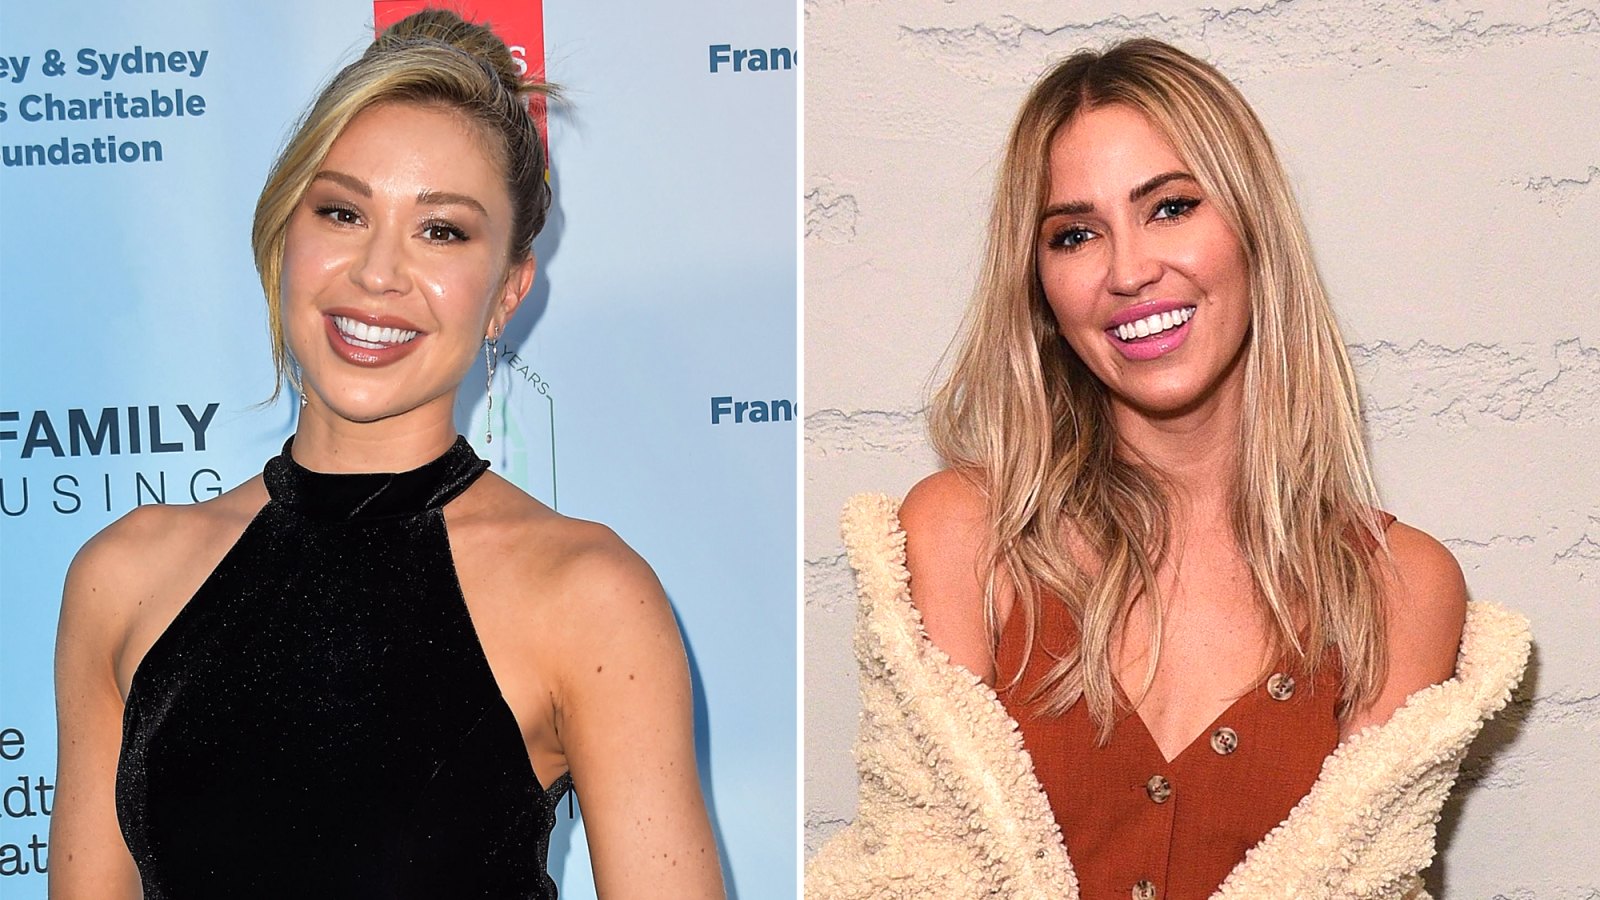 Bachelor Nation Rallies Around Gabby Windey After Coming Out News- Kaitlyn Bristowe Needed This Love Story’